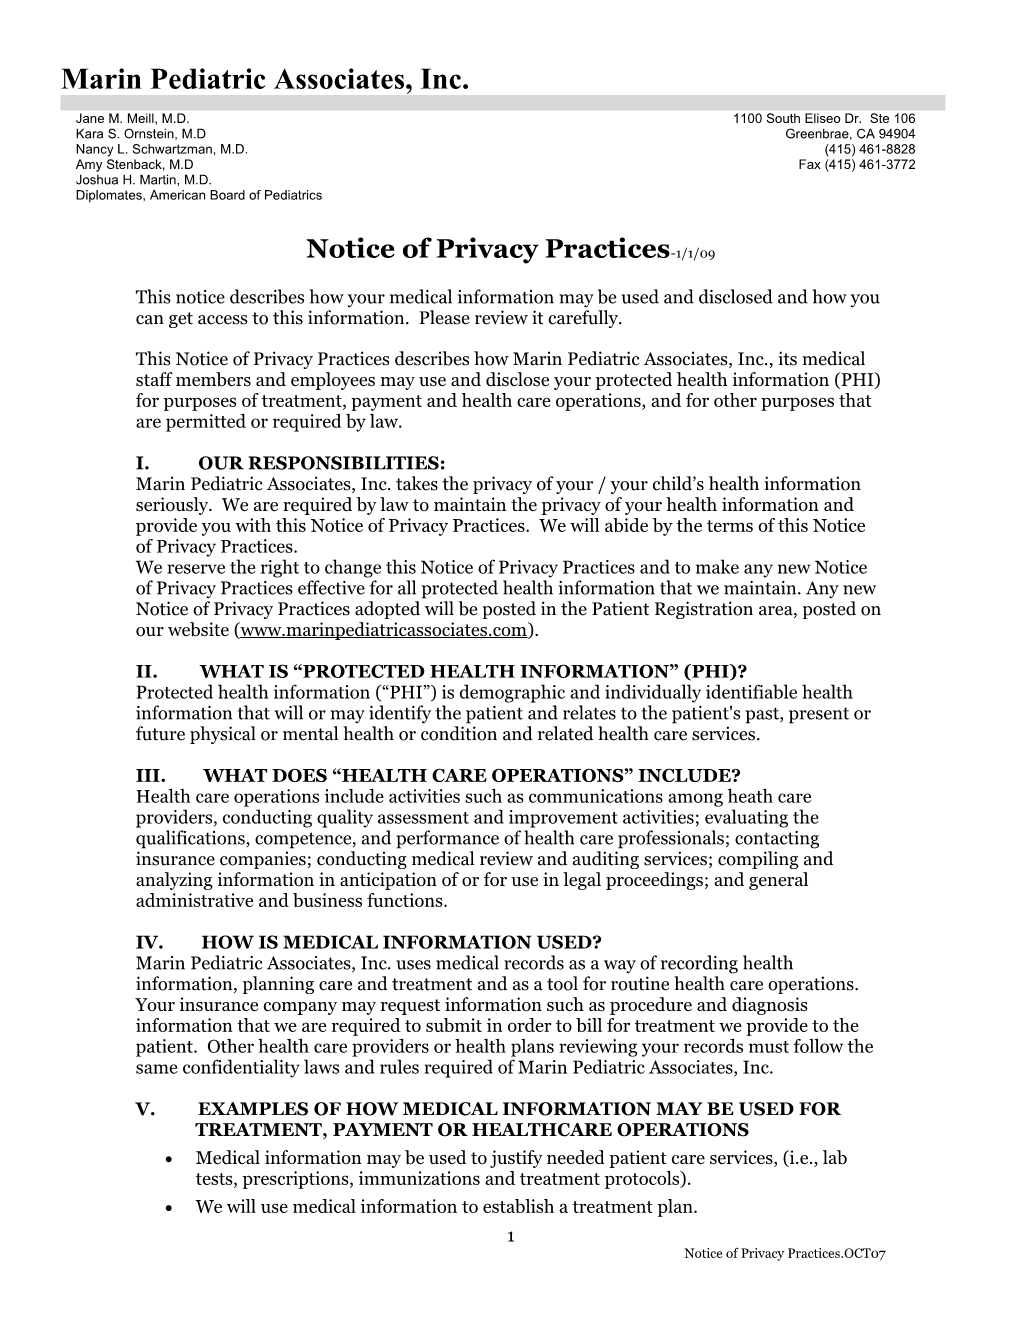 Notice of Privacy Practices s22